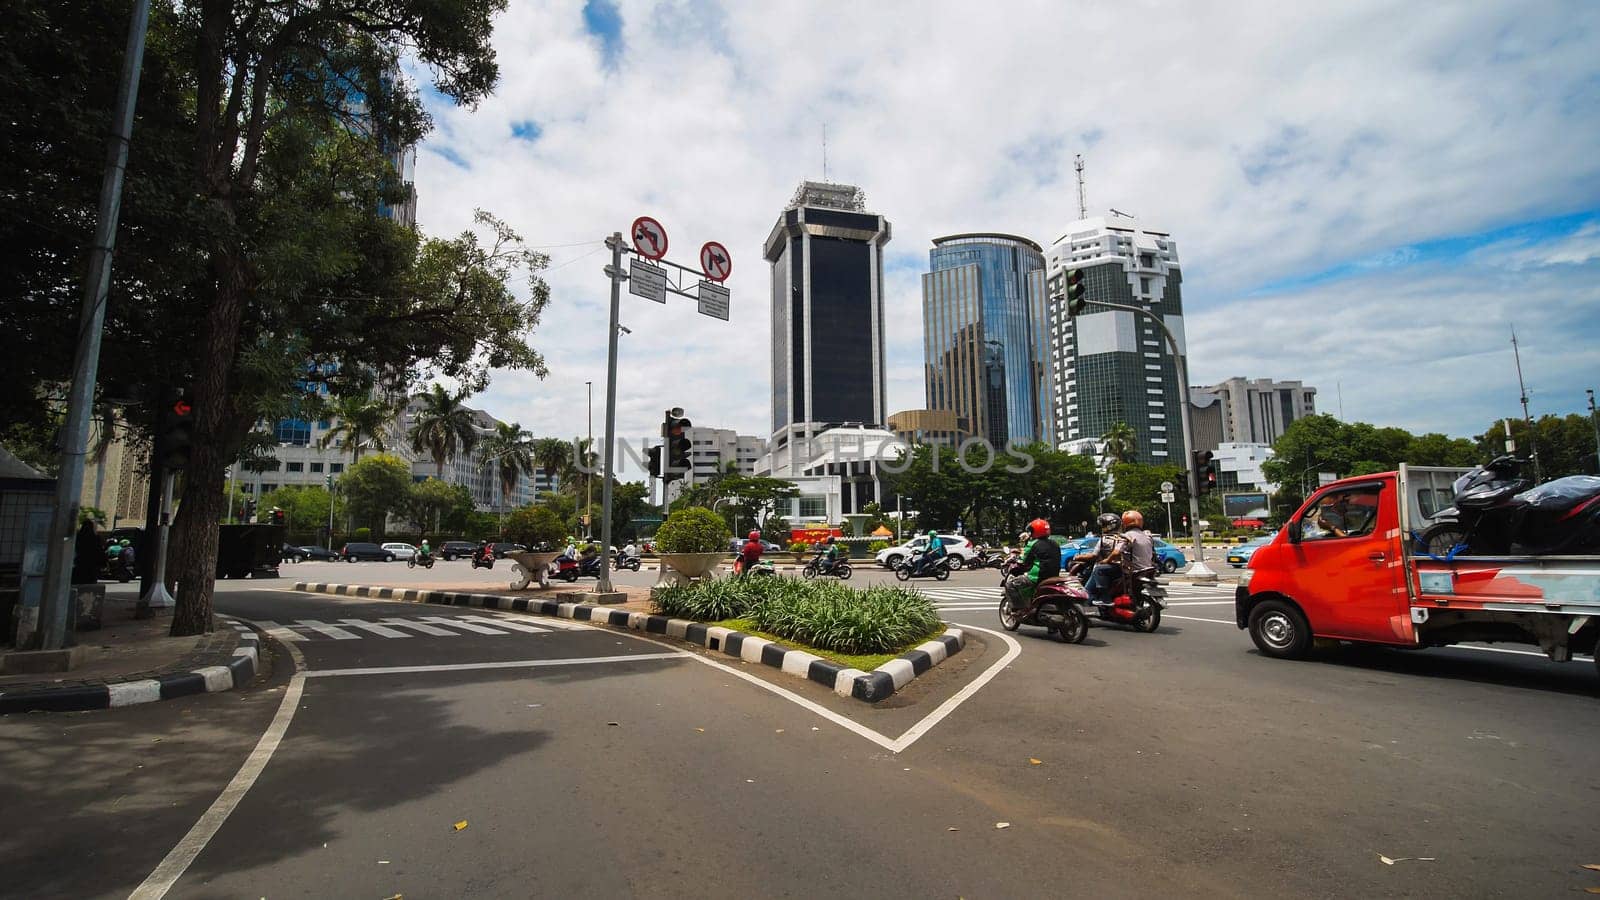 Jakarta's roads and streets with cars during the daytime. by DovidPro